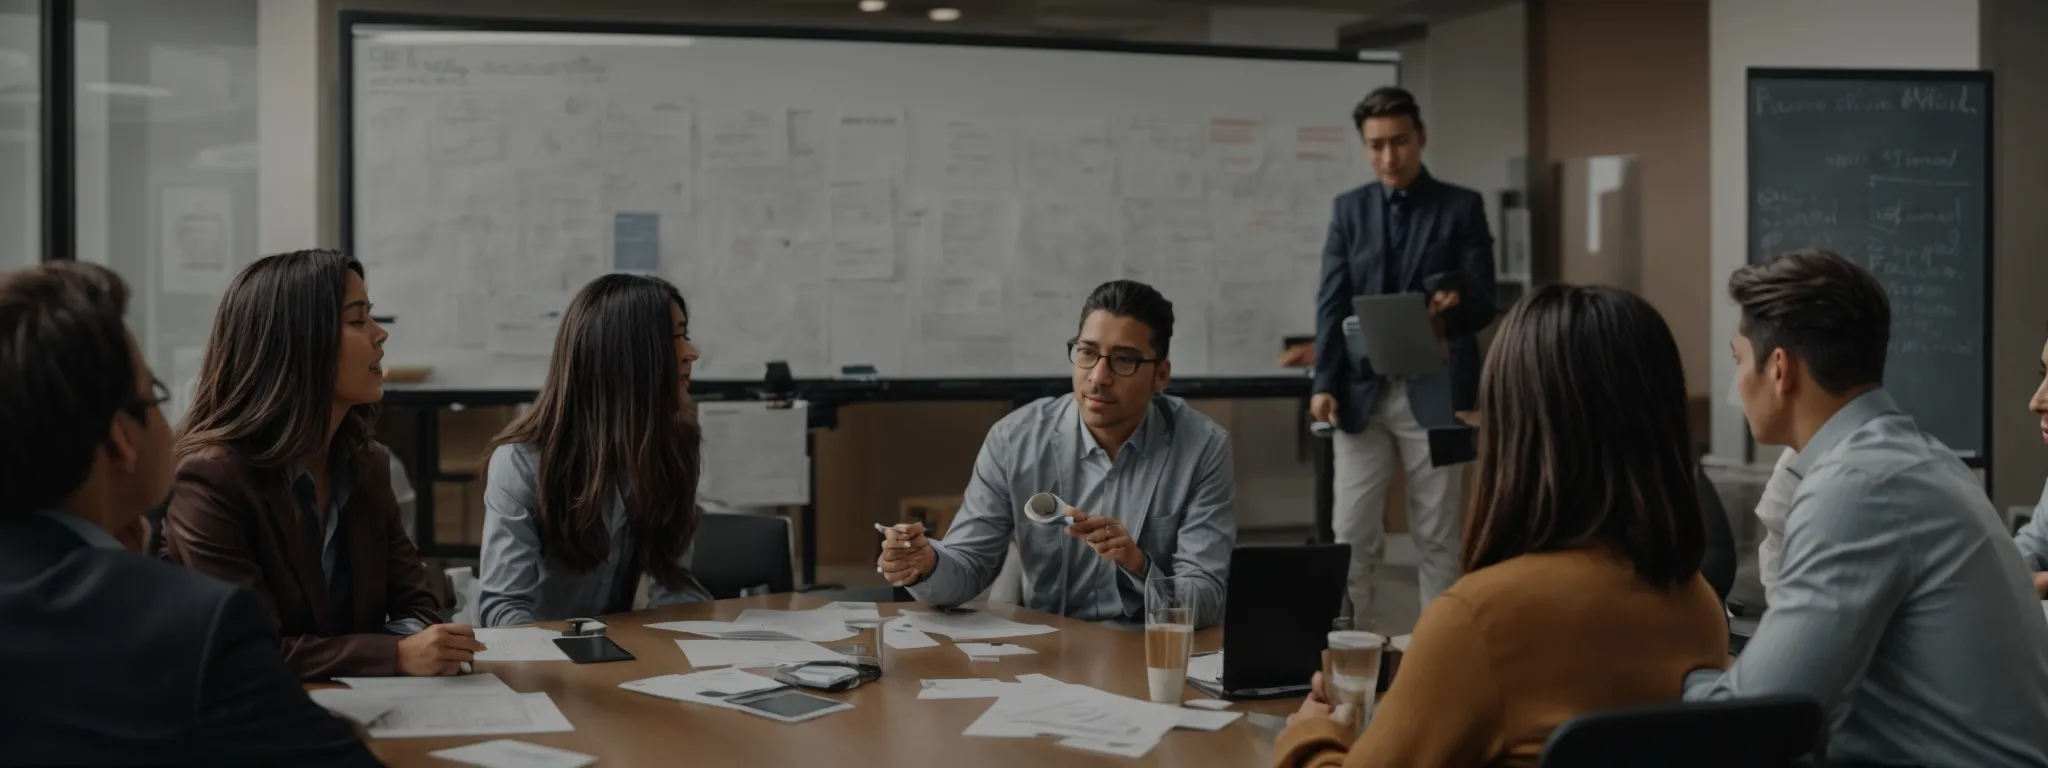 a marketing team is gathered around a conference table, animatedly discussing a campaign strategy with a clear whiteboard in the background.